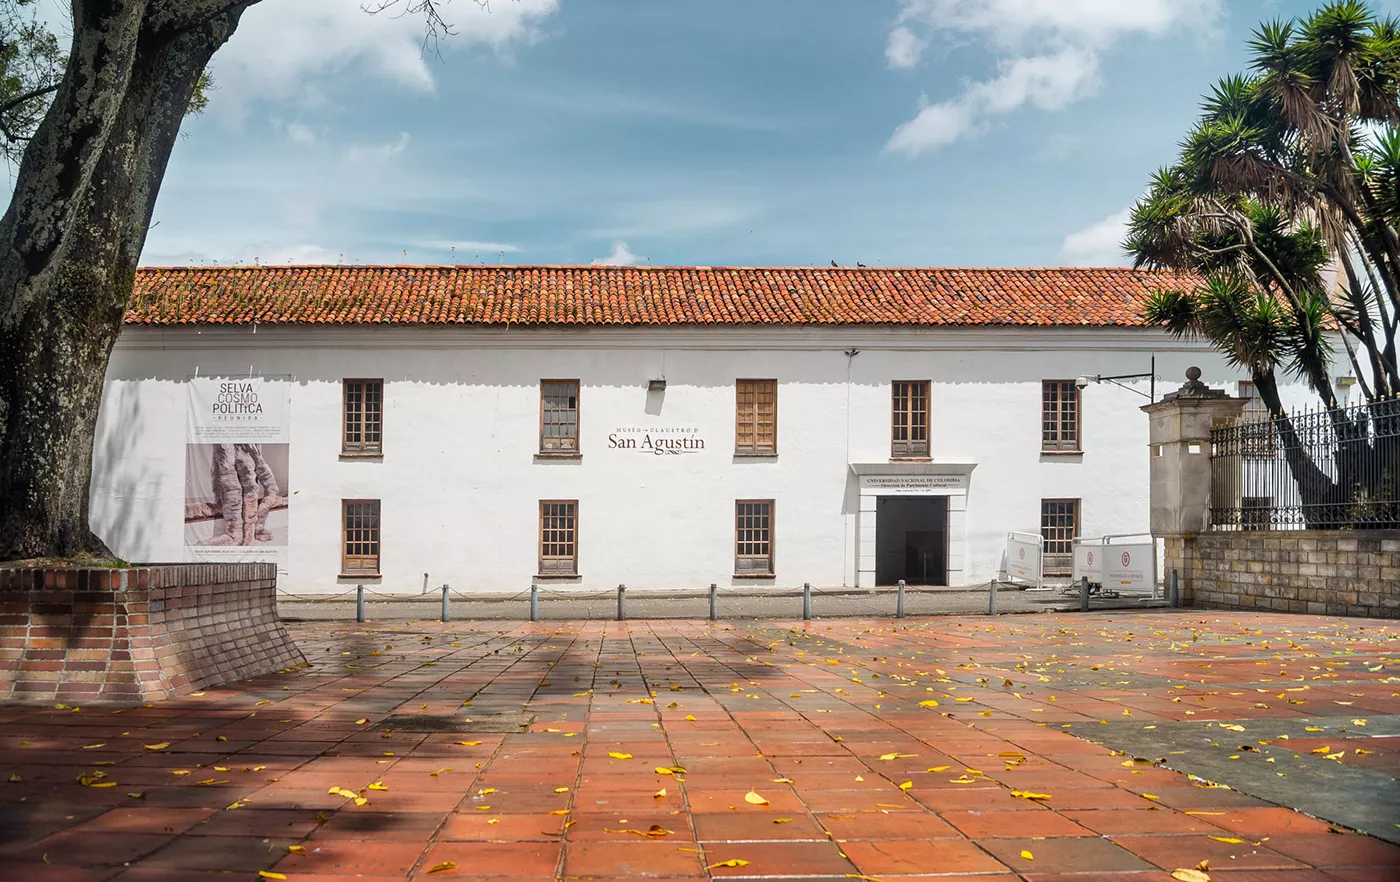 St. Augustine Cloister in Colombia, South America | Museums - Rated 4